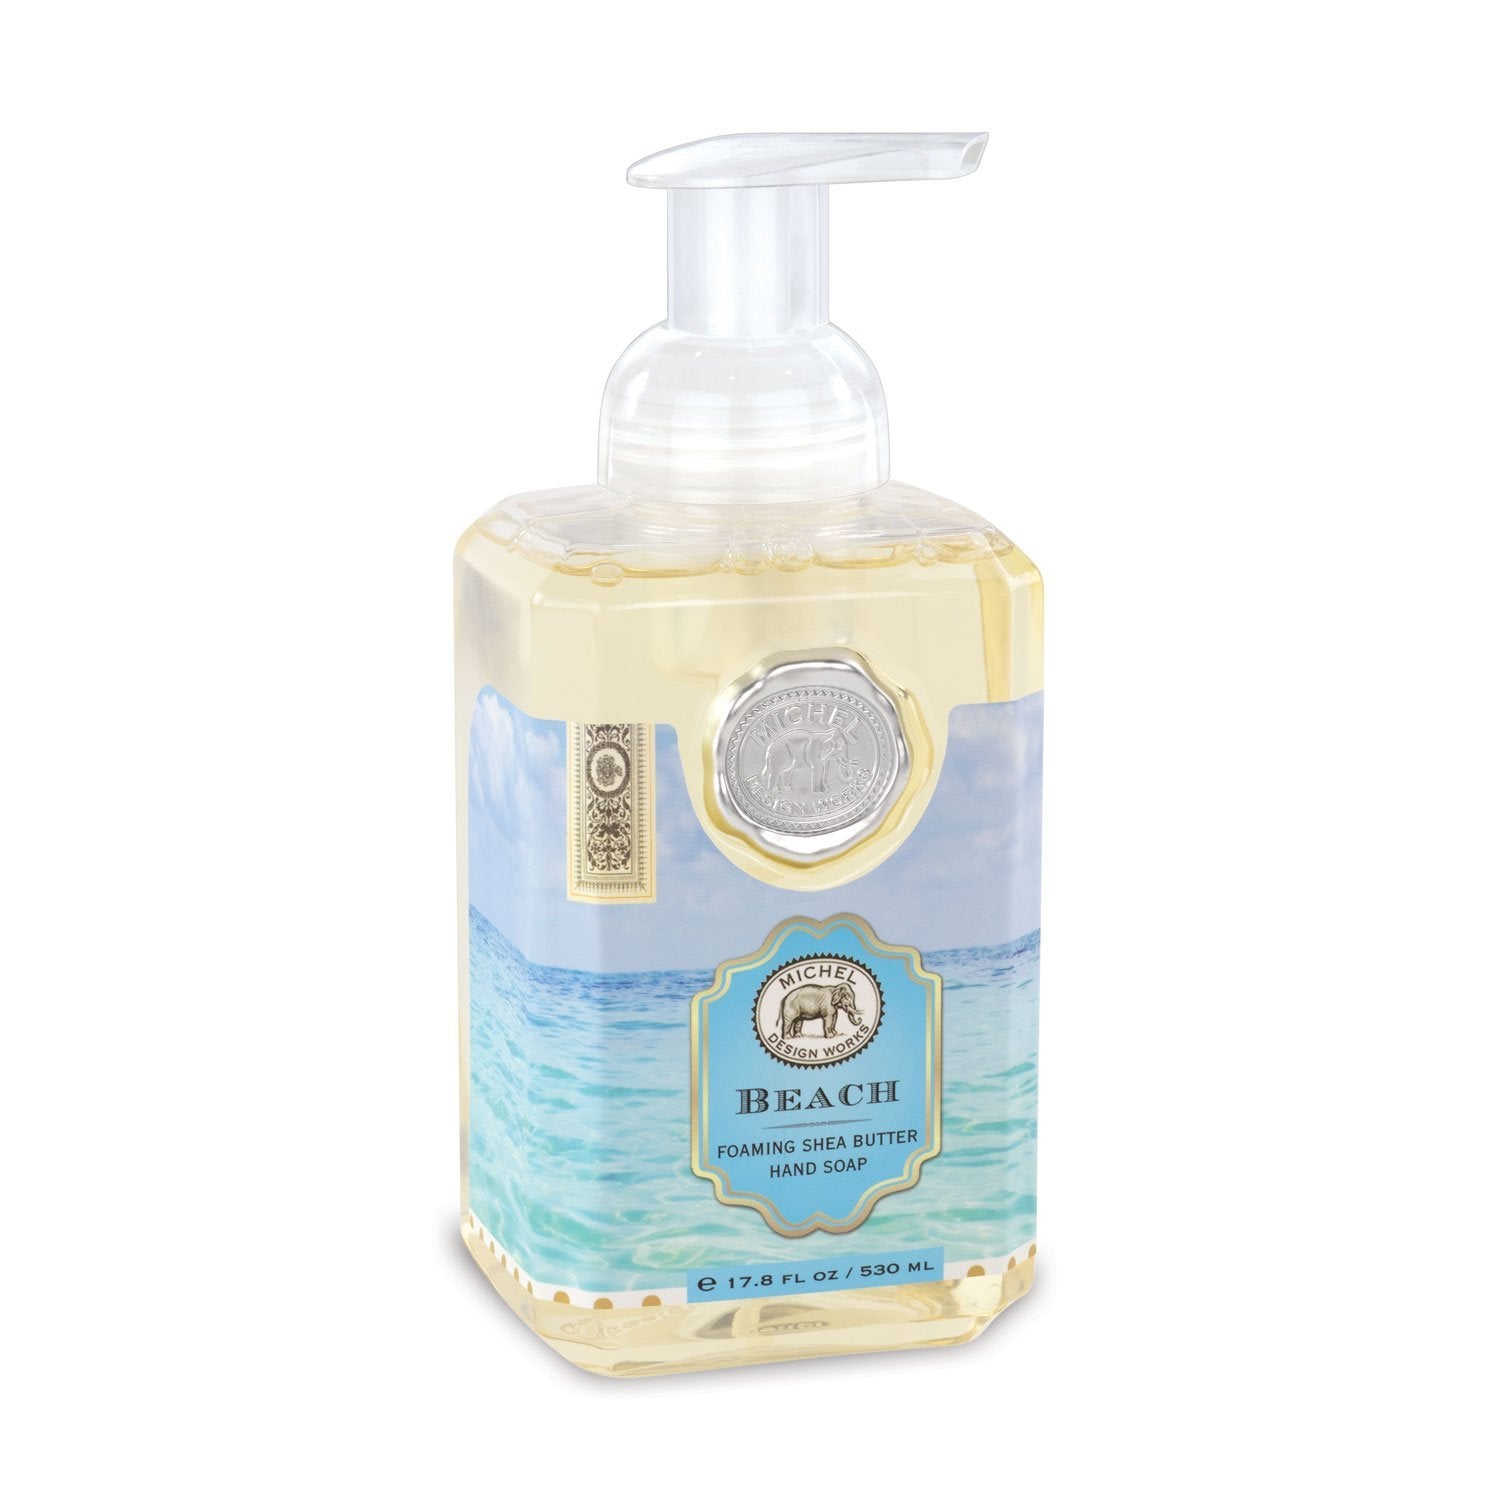 beach foaming hand soap on a white background